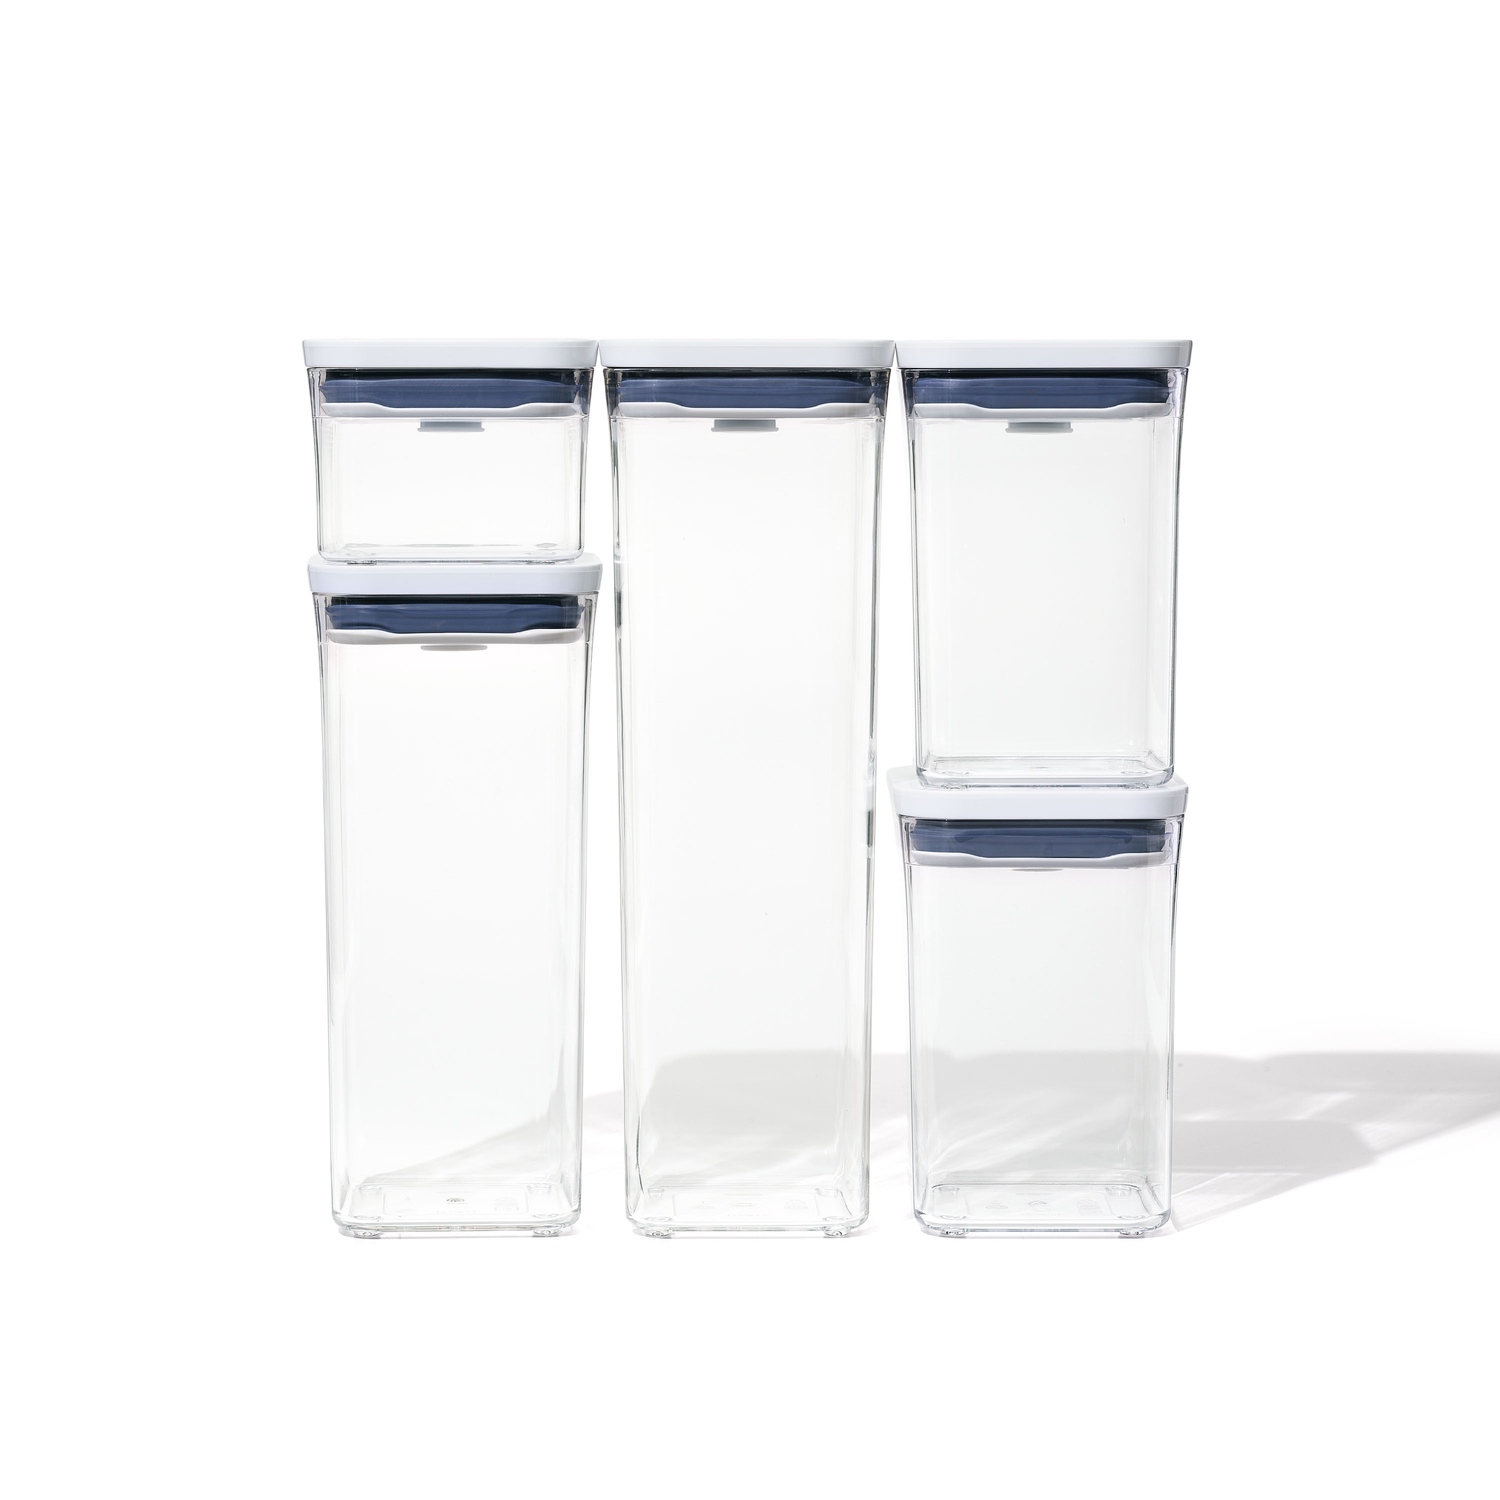 Oxo Softworks 3.7qt/3.5L Pop Container Pair